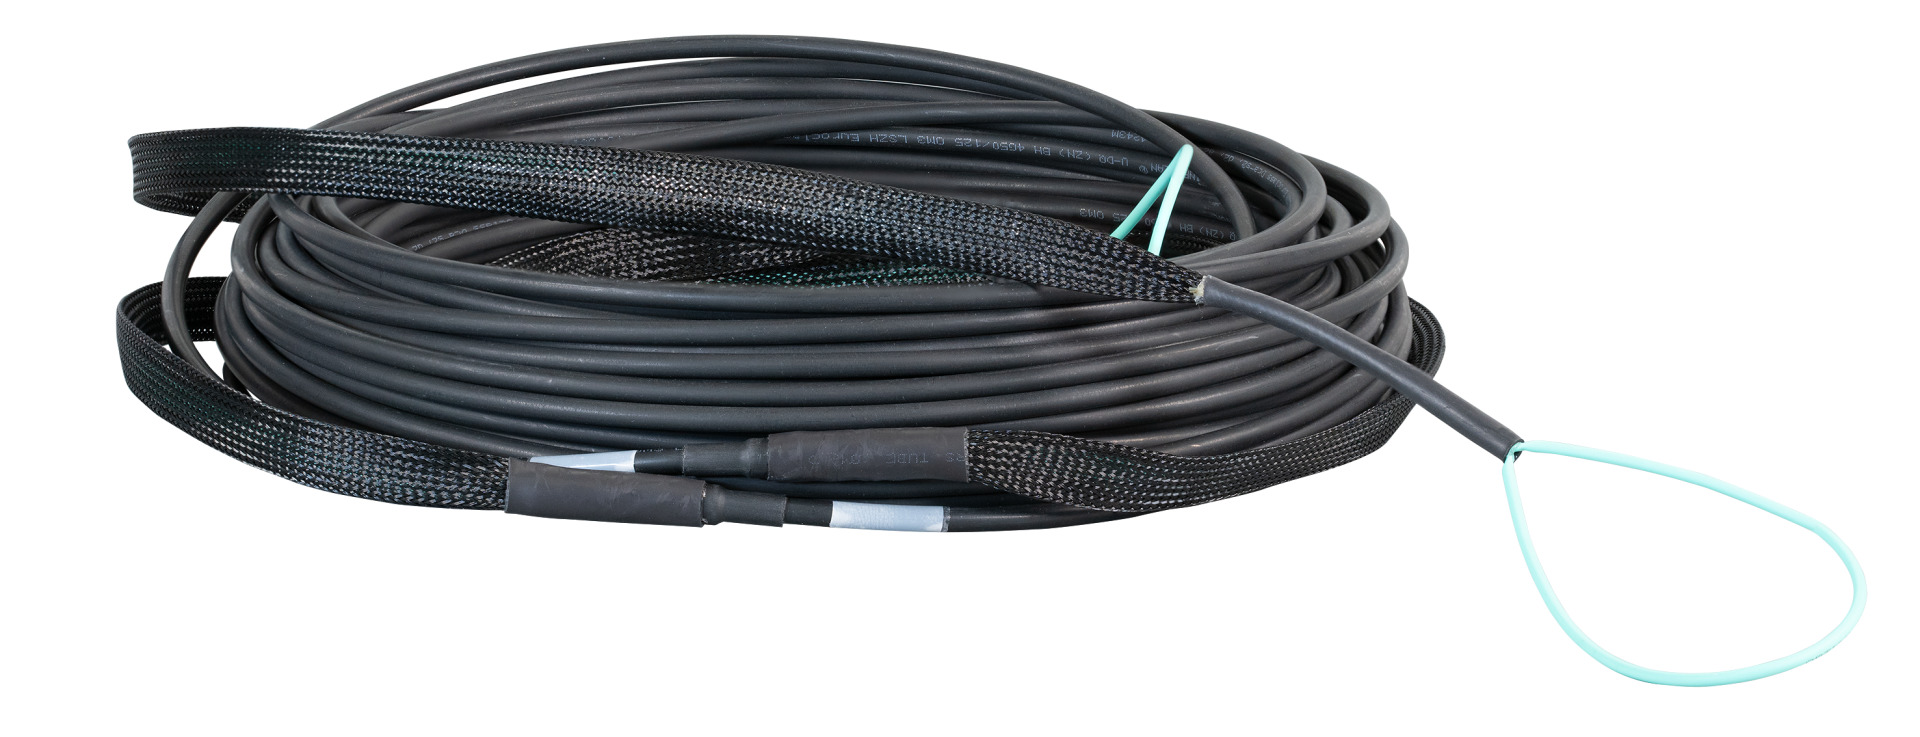 Trunk cable U-DQ(ZN)BH 8G 50/125, LC/LC OM3 170m